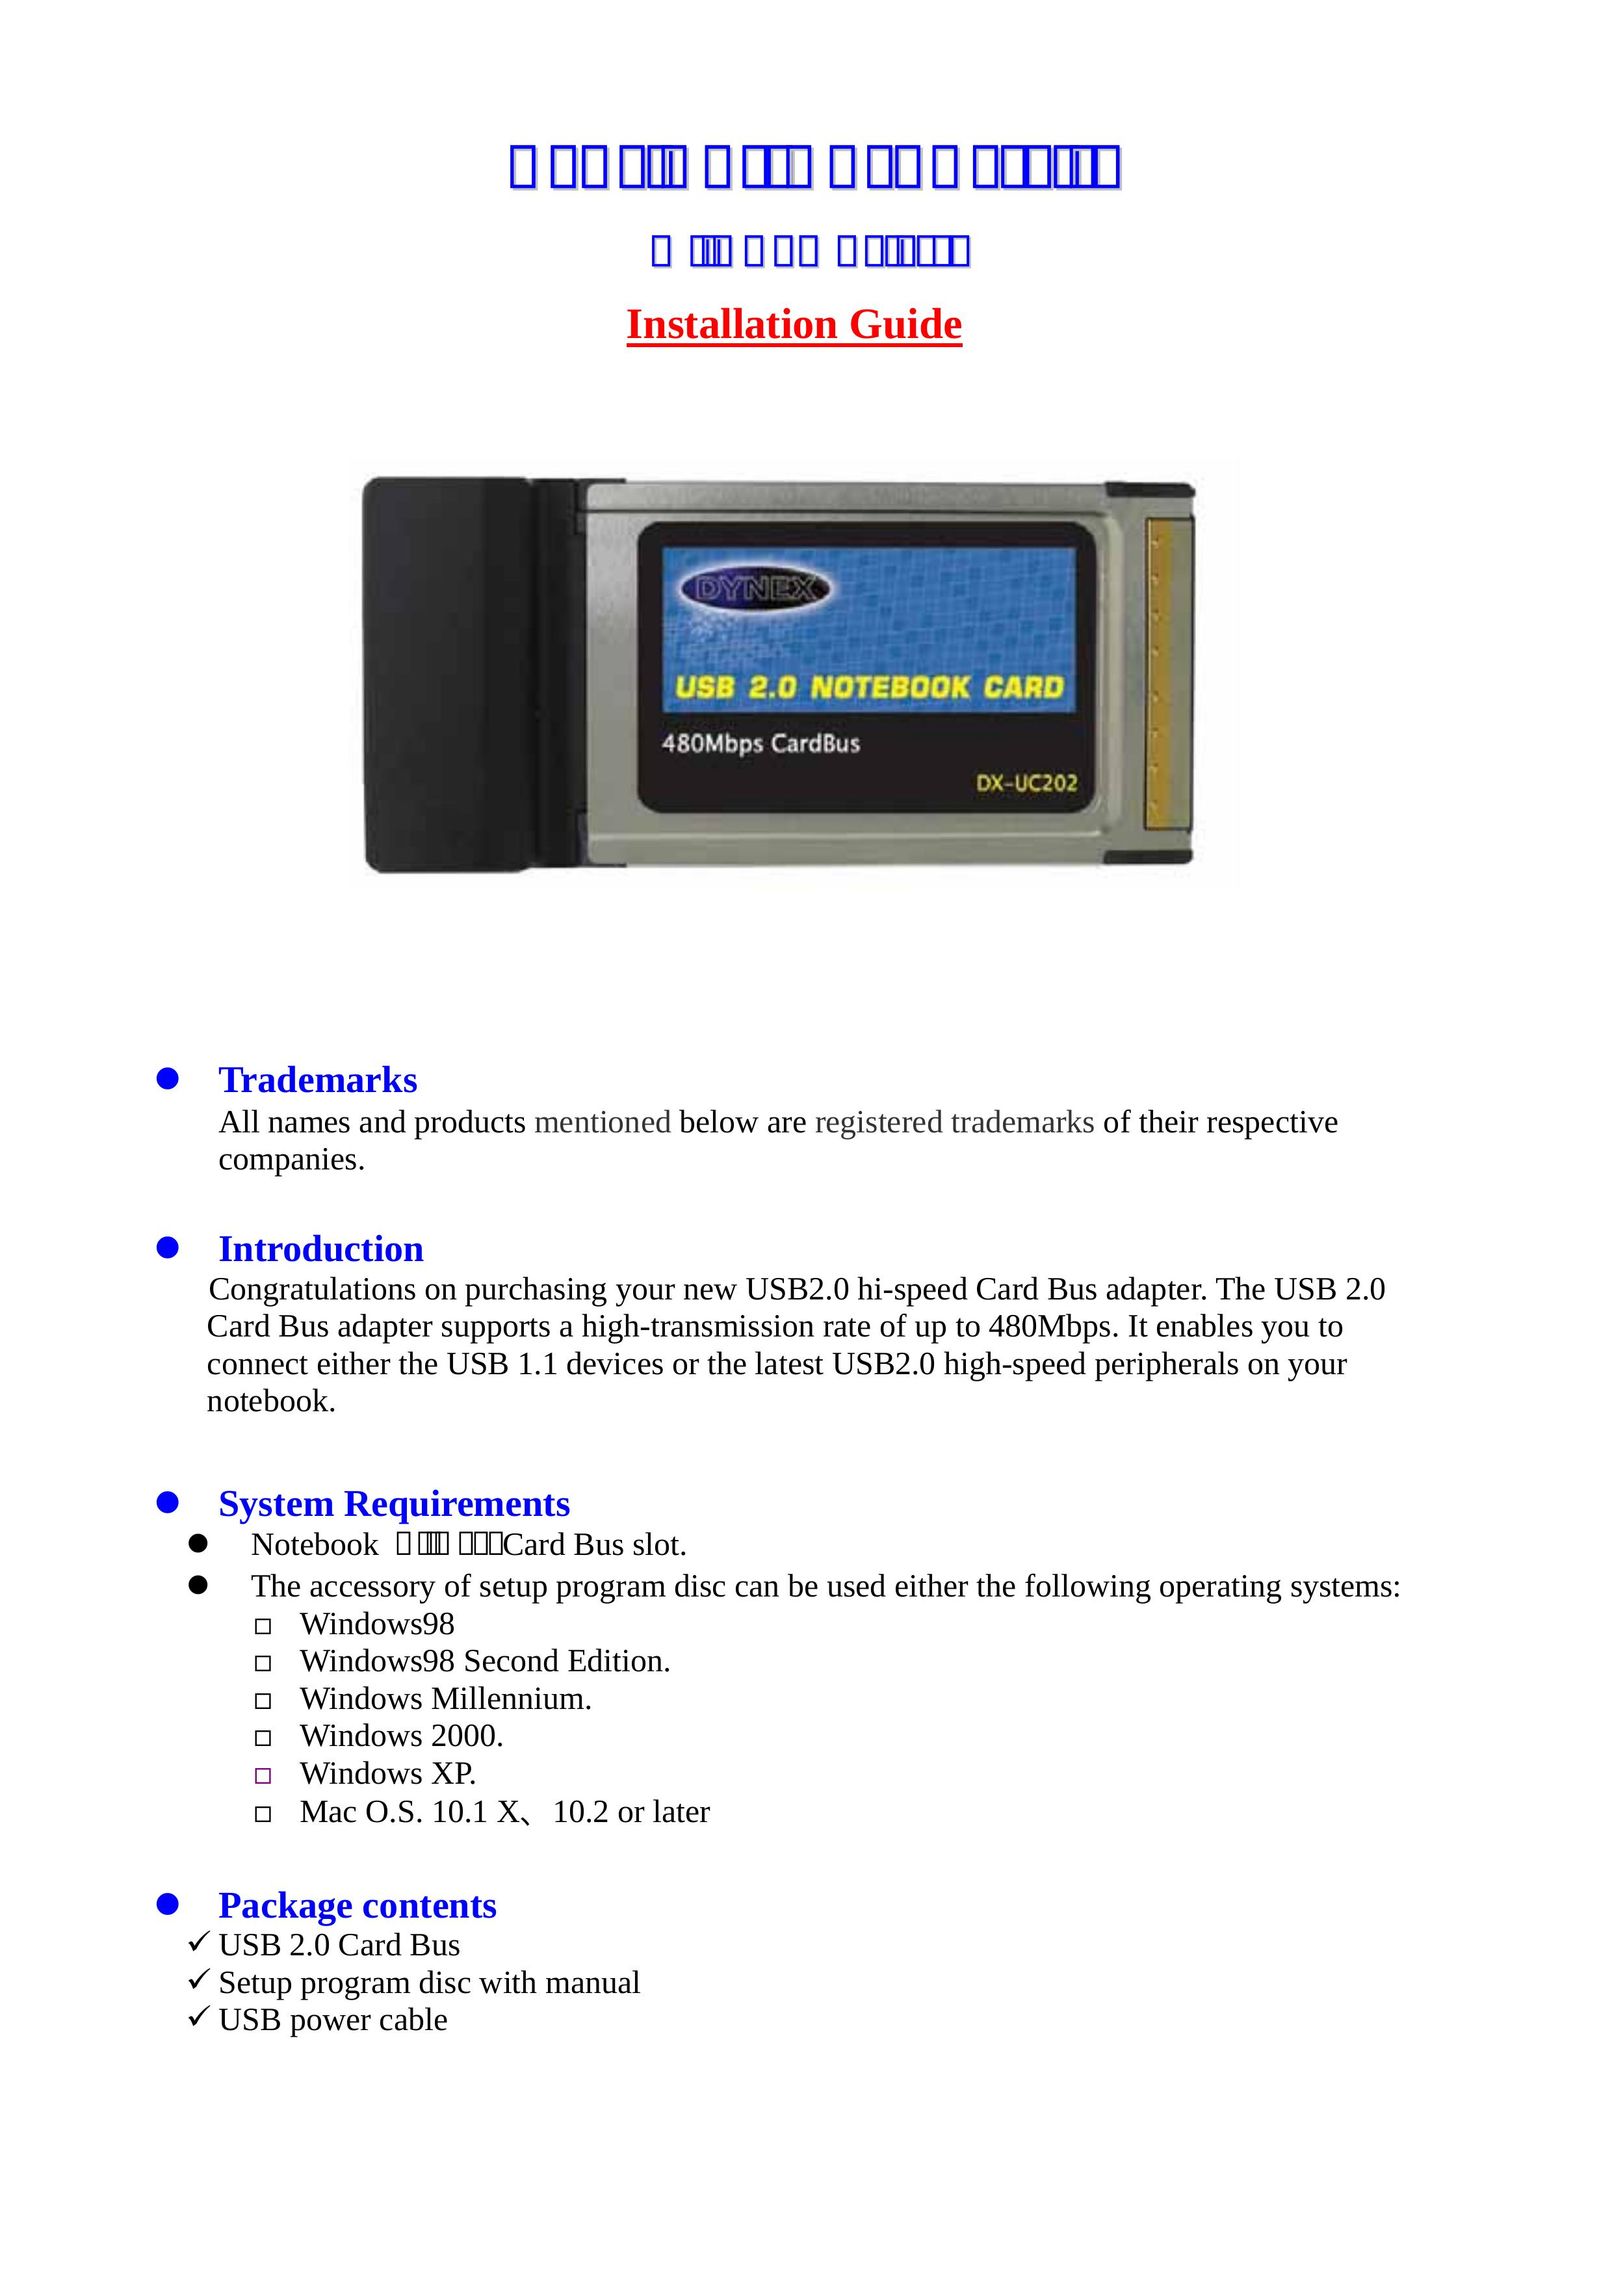 Dynex DX-UC202 Network Card User Manual (Page 1)